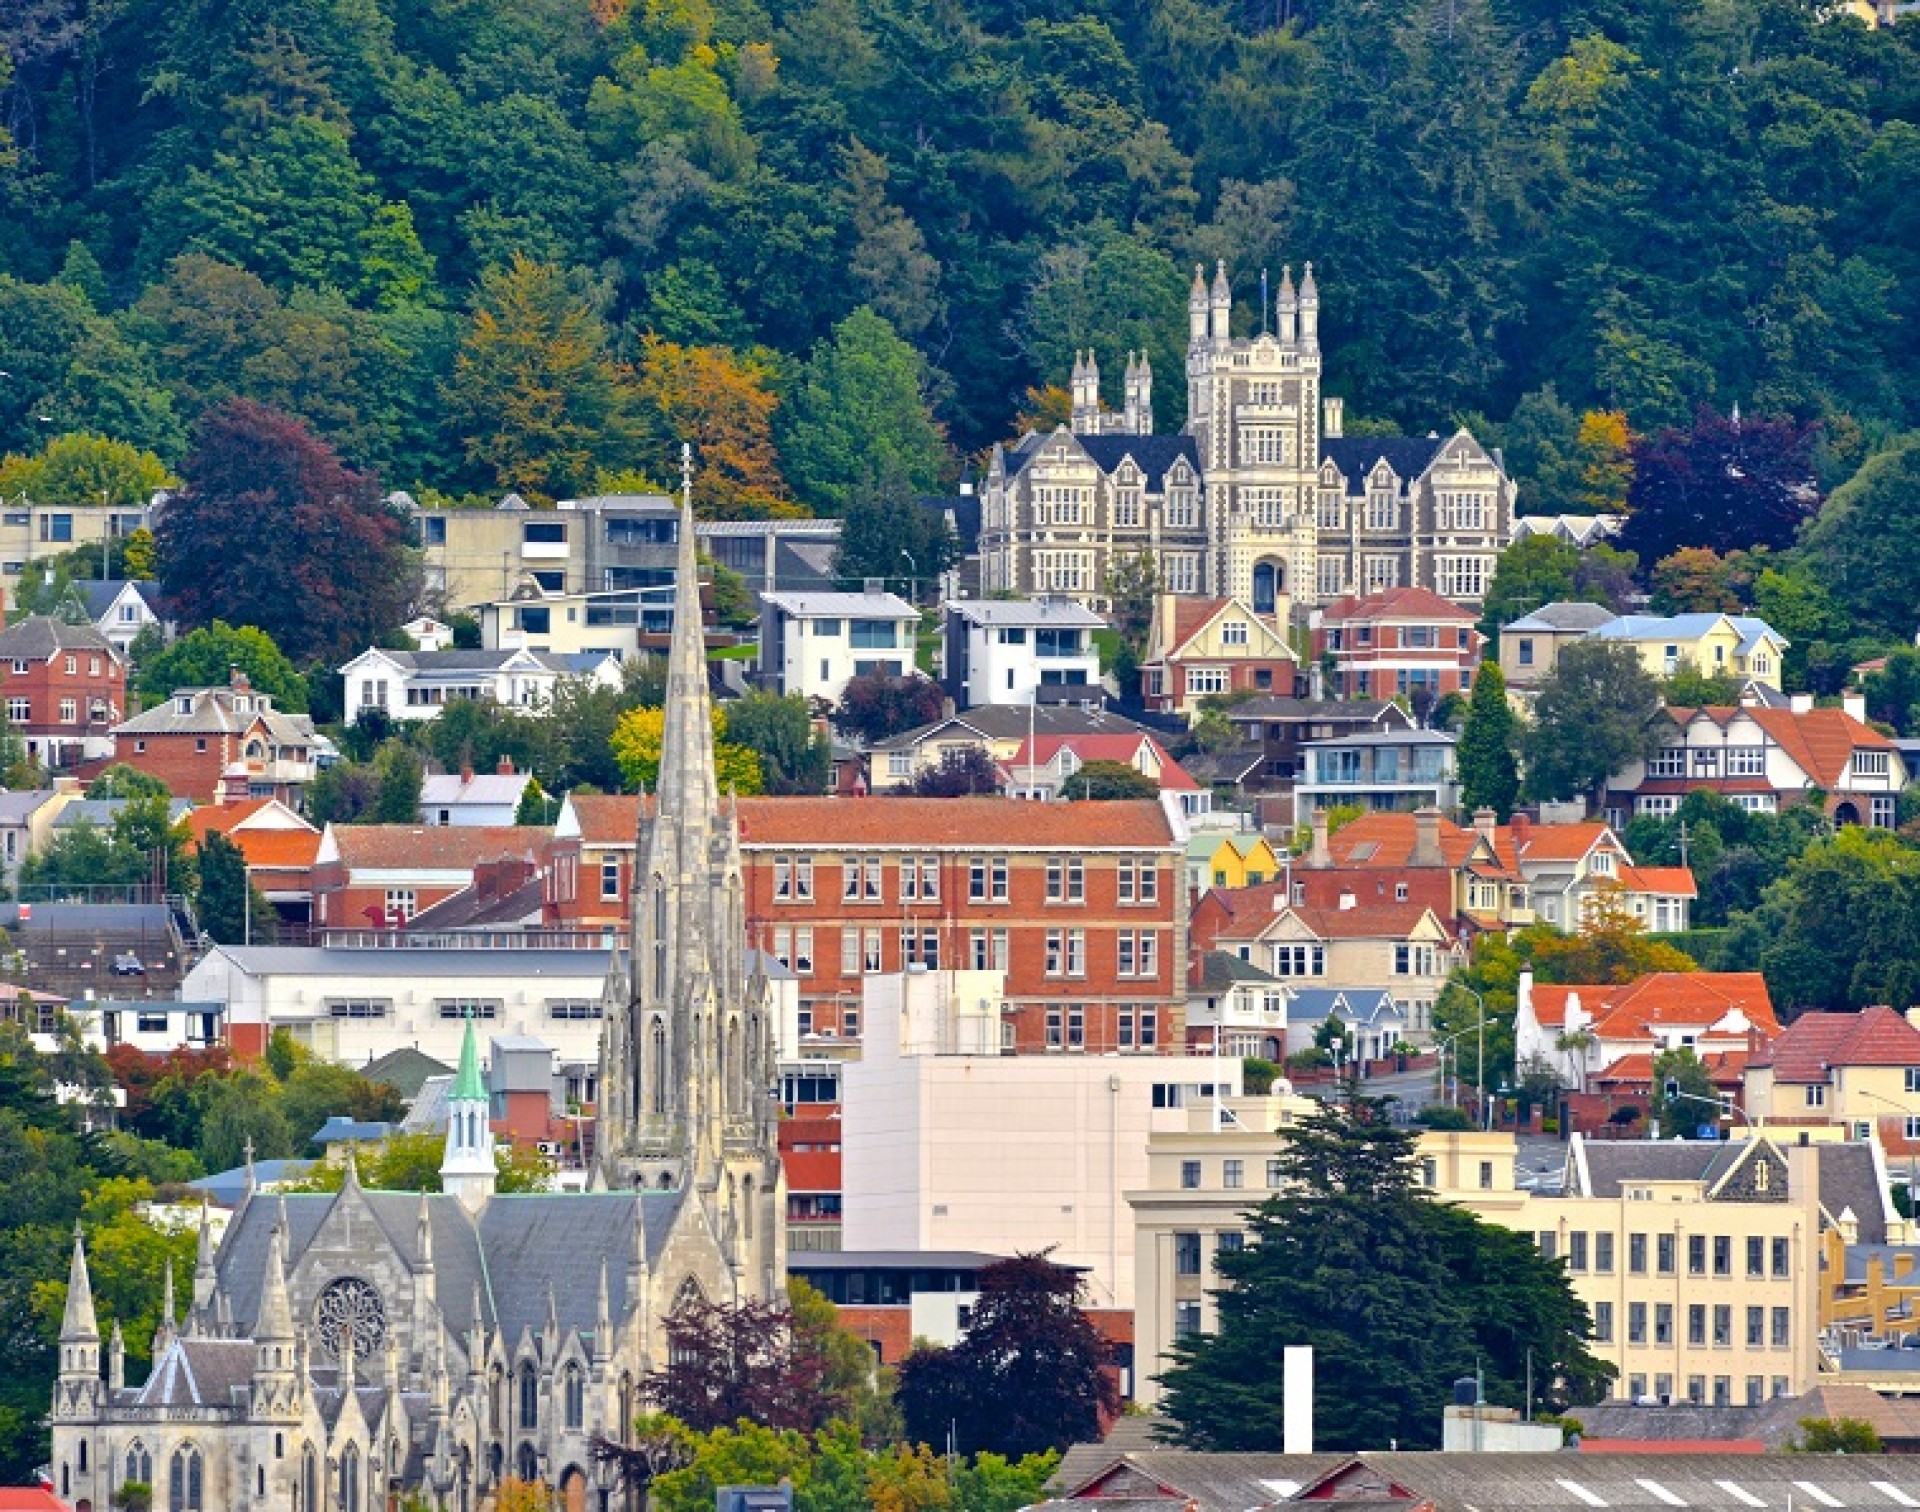 Dunedin's Stay and Play, Heritage Homes & Castles